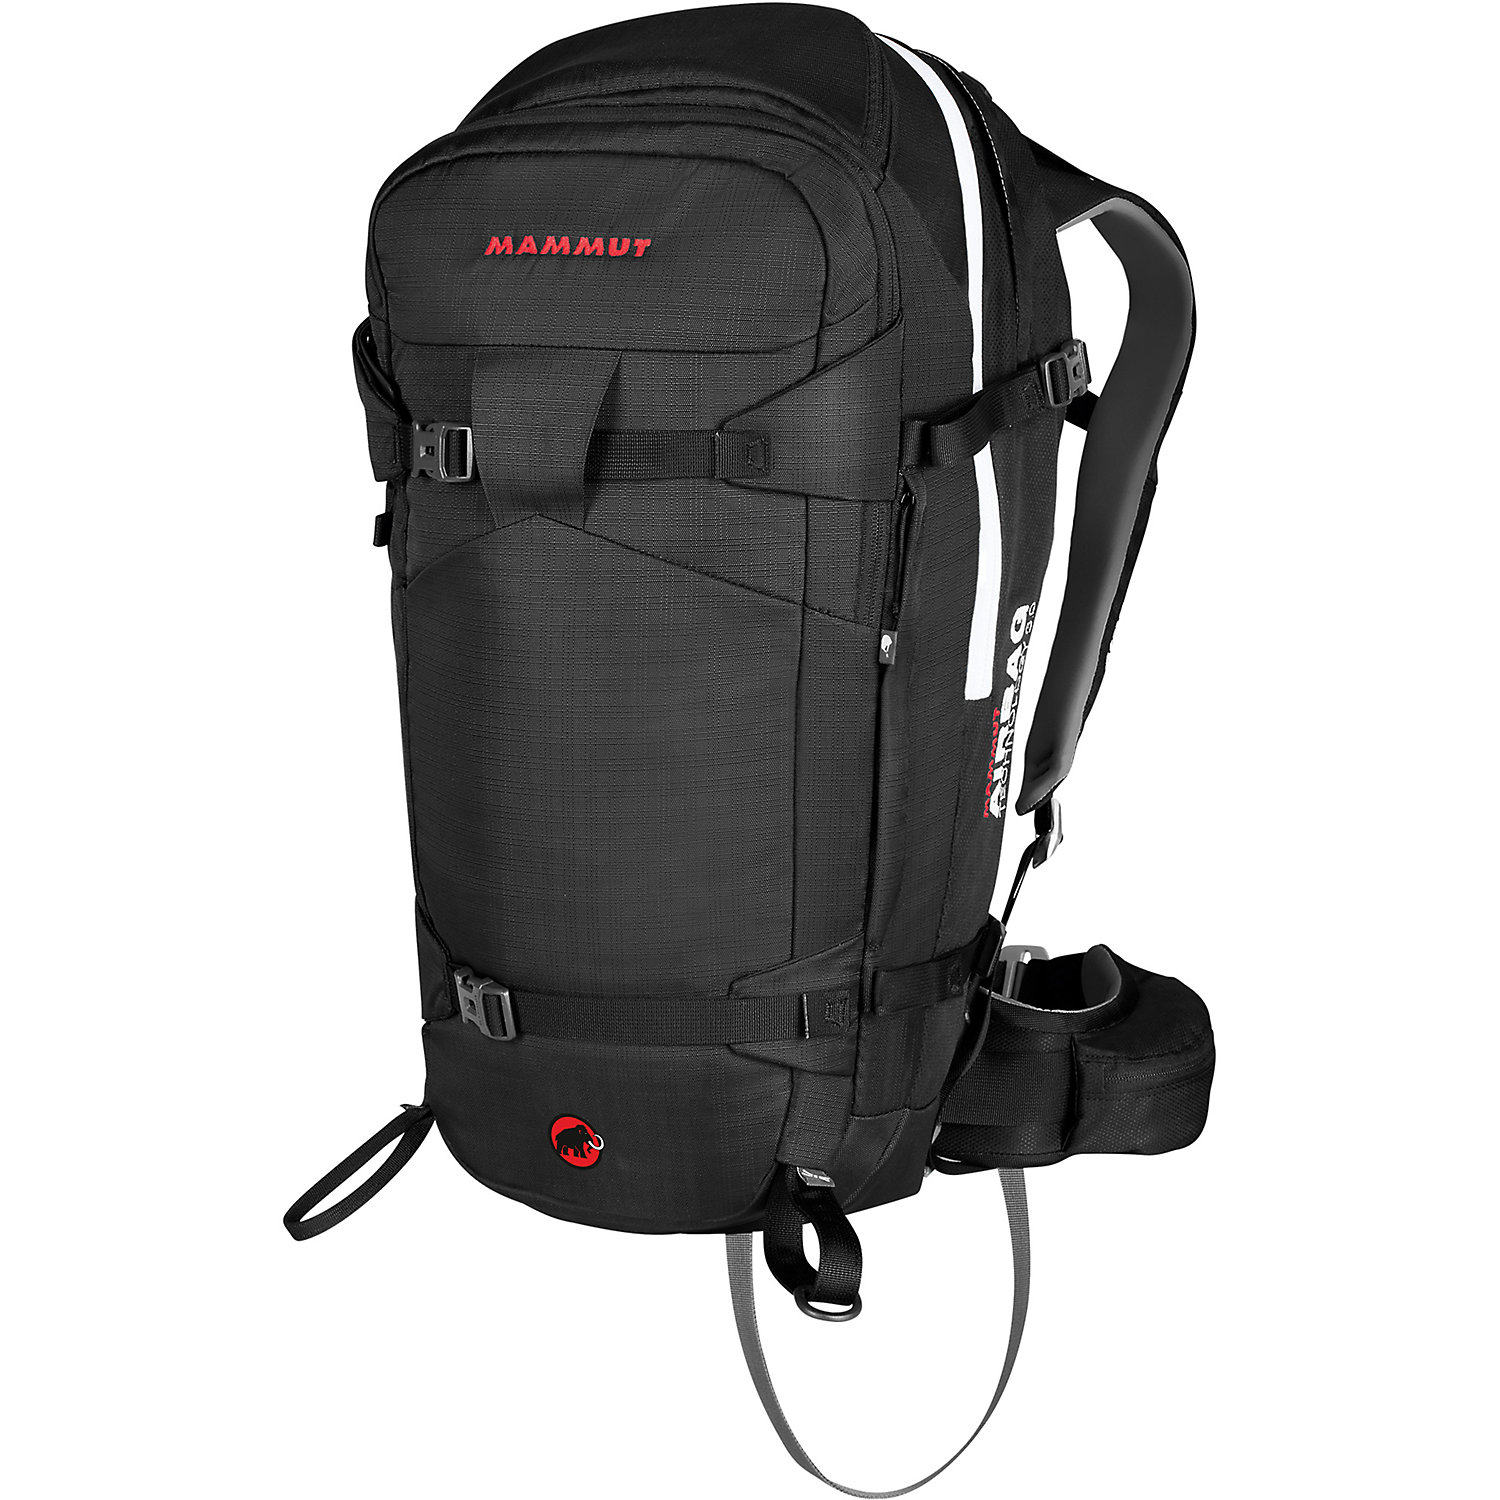 Mammut Removable 3.0 Airbag System